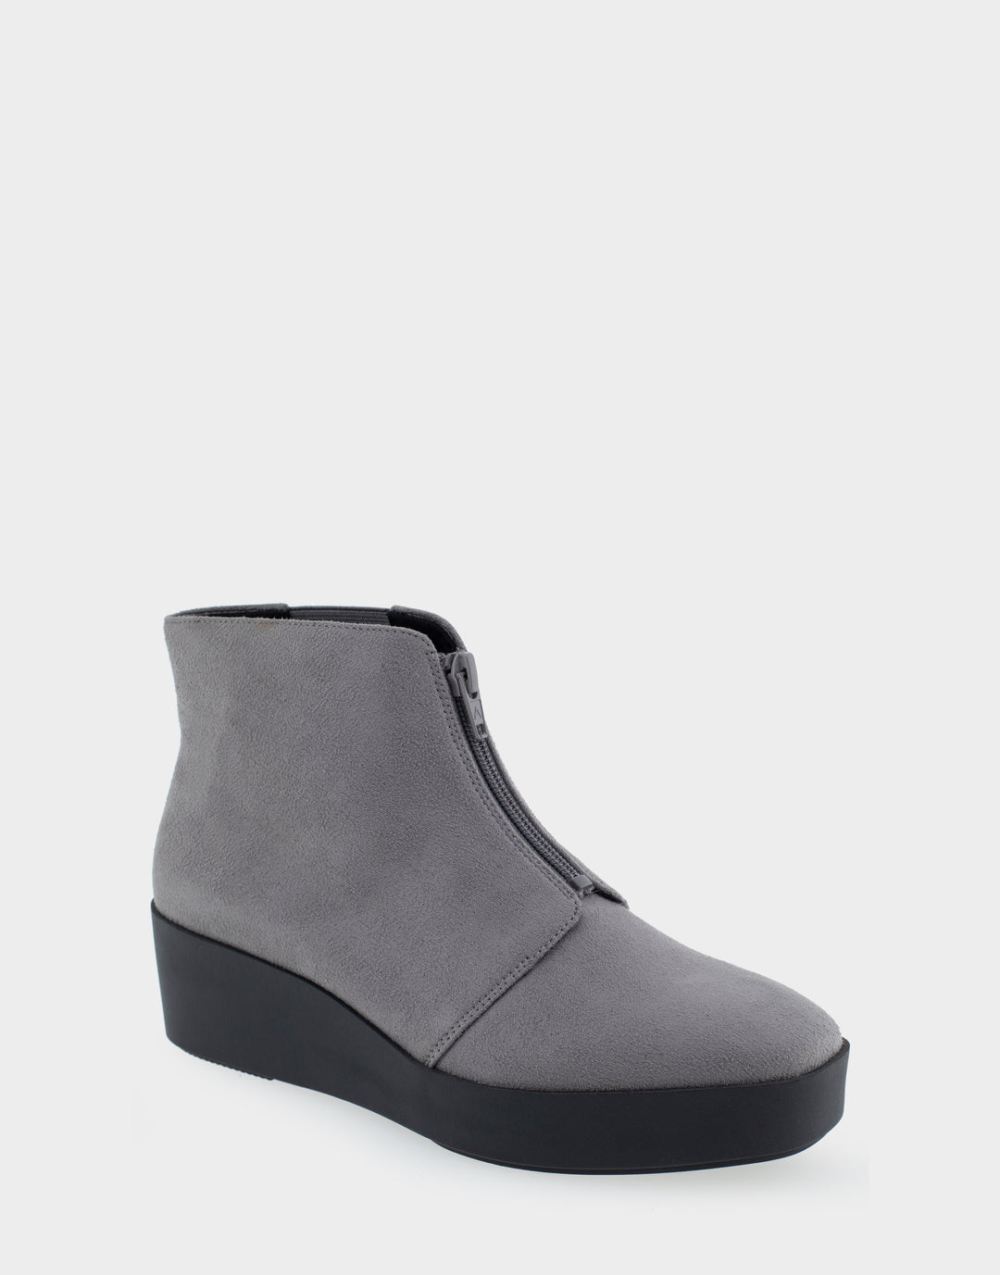 Women's | Carin Quiet Shade Faux Suede Wedge Heel Ankle Boot